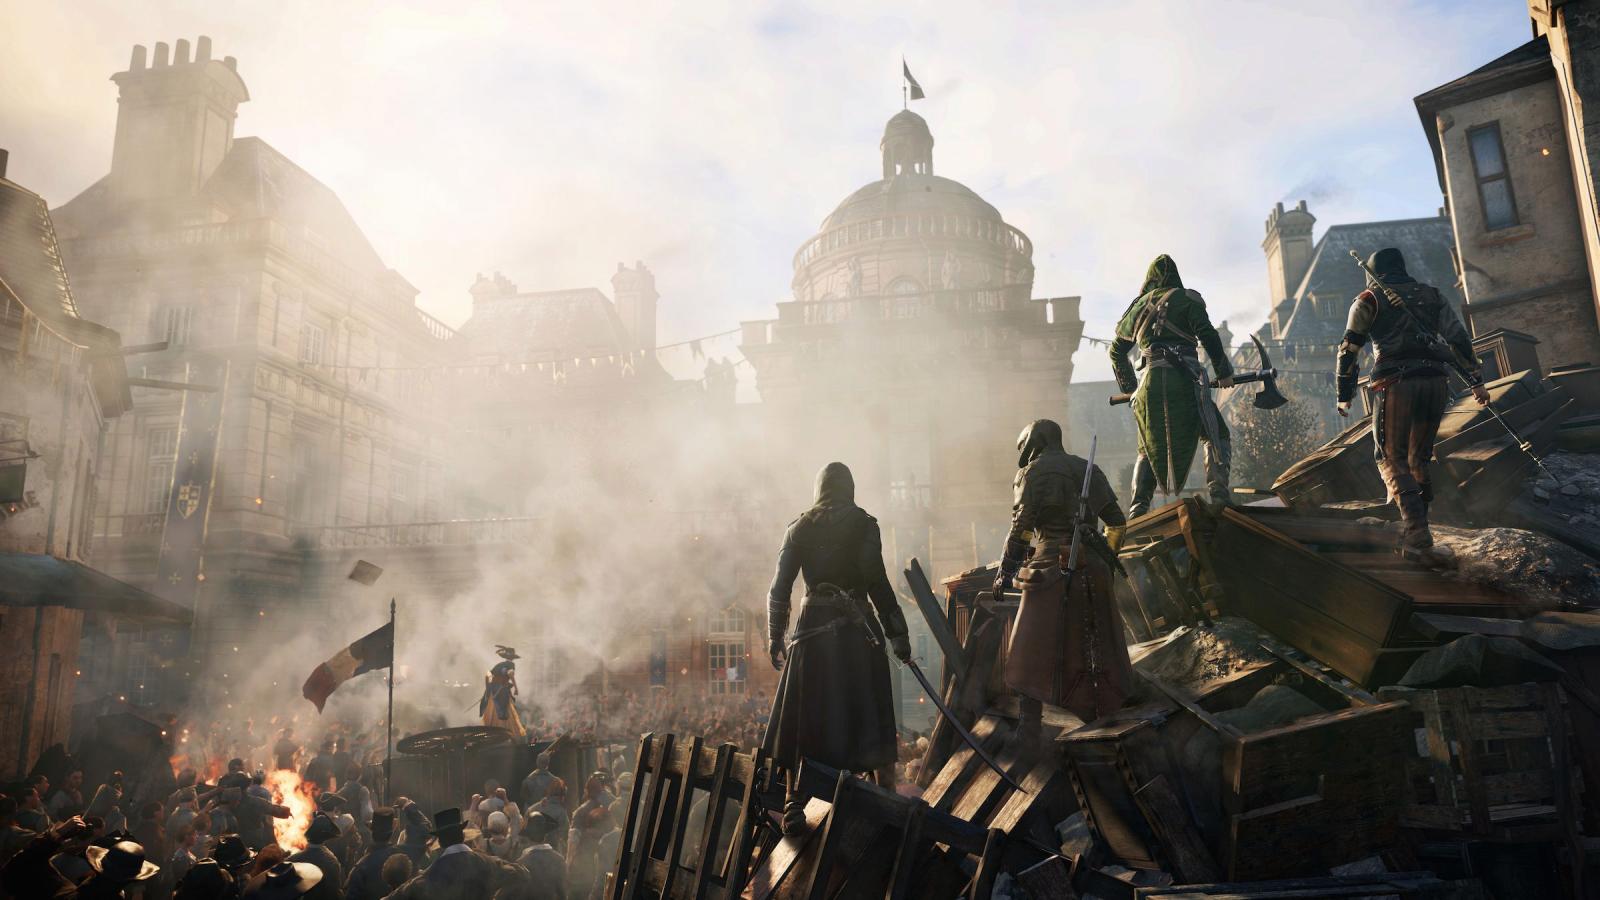 The new “Assassin's Creed” game is reviving an ancient debate over the French Revolution